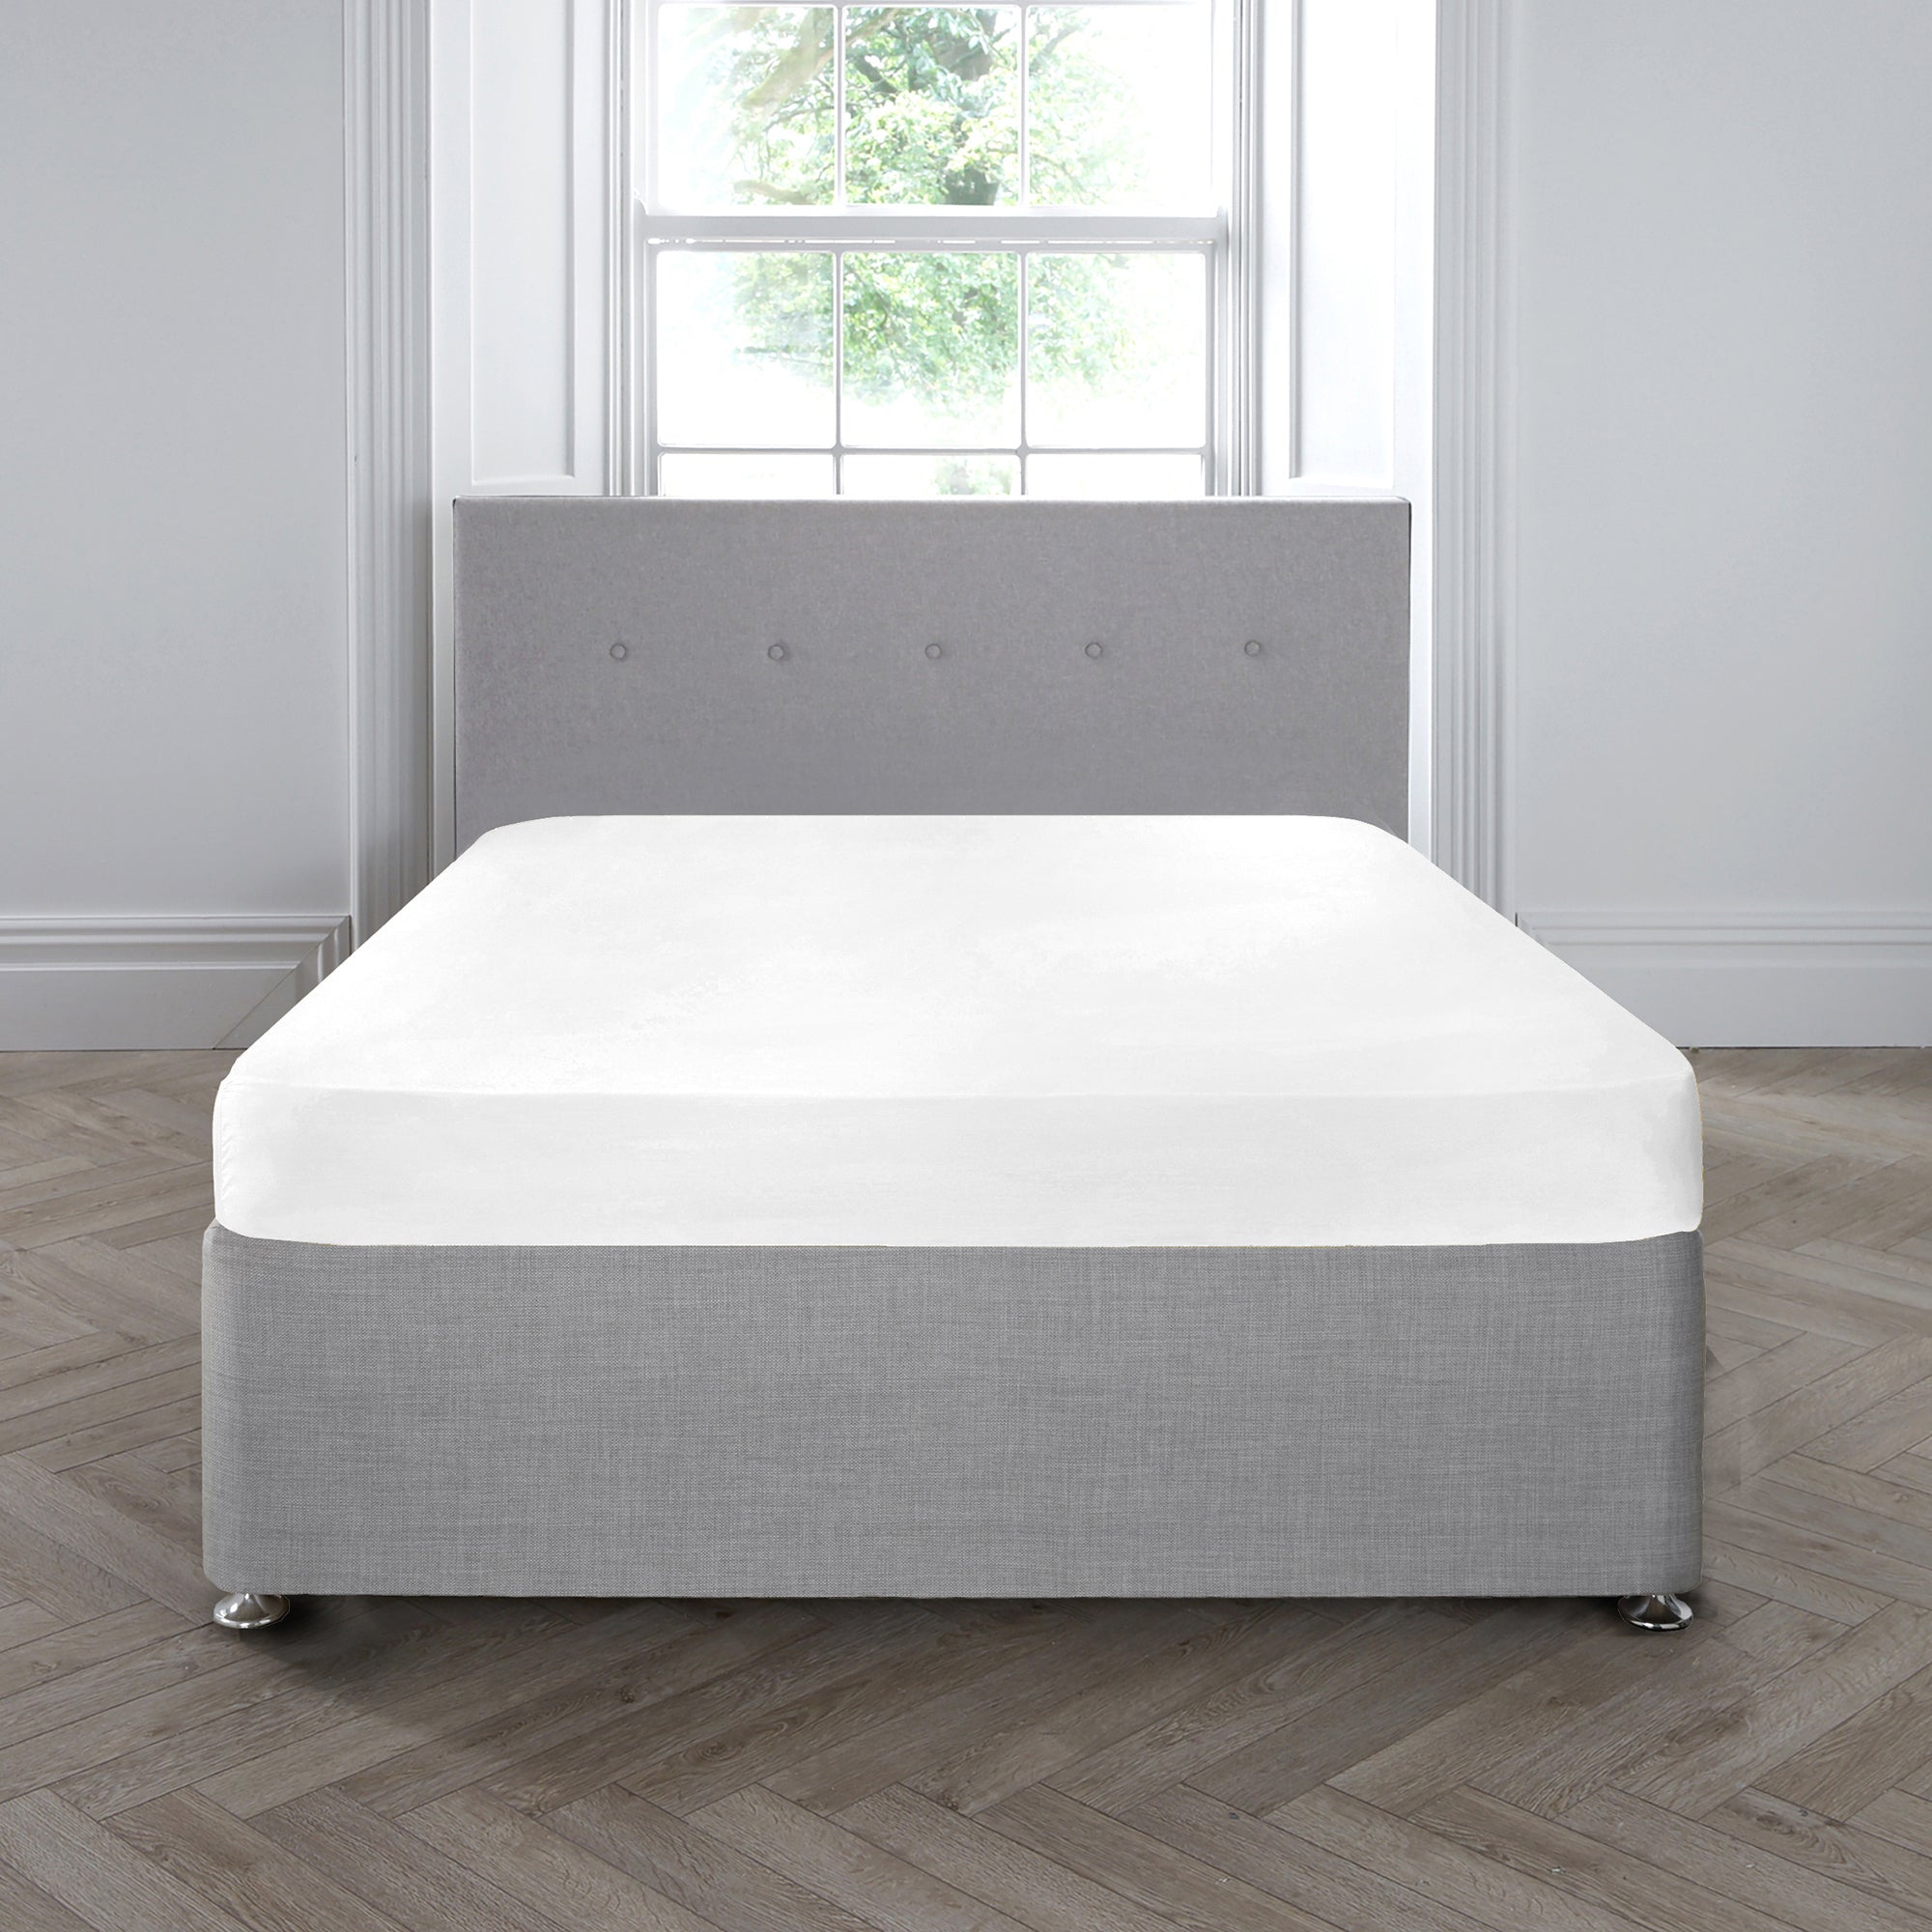 200TC Plain Dye 35cm Deep Fitted Sheet by Appletree Boutique in White - 35cm Deep Fitted Sheet - Appletree Boutique